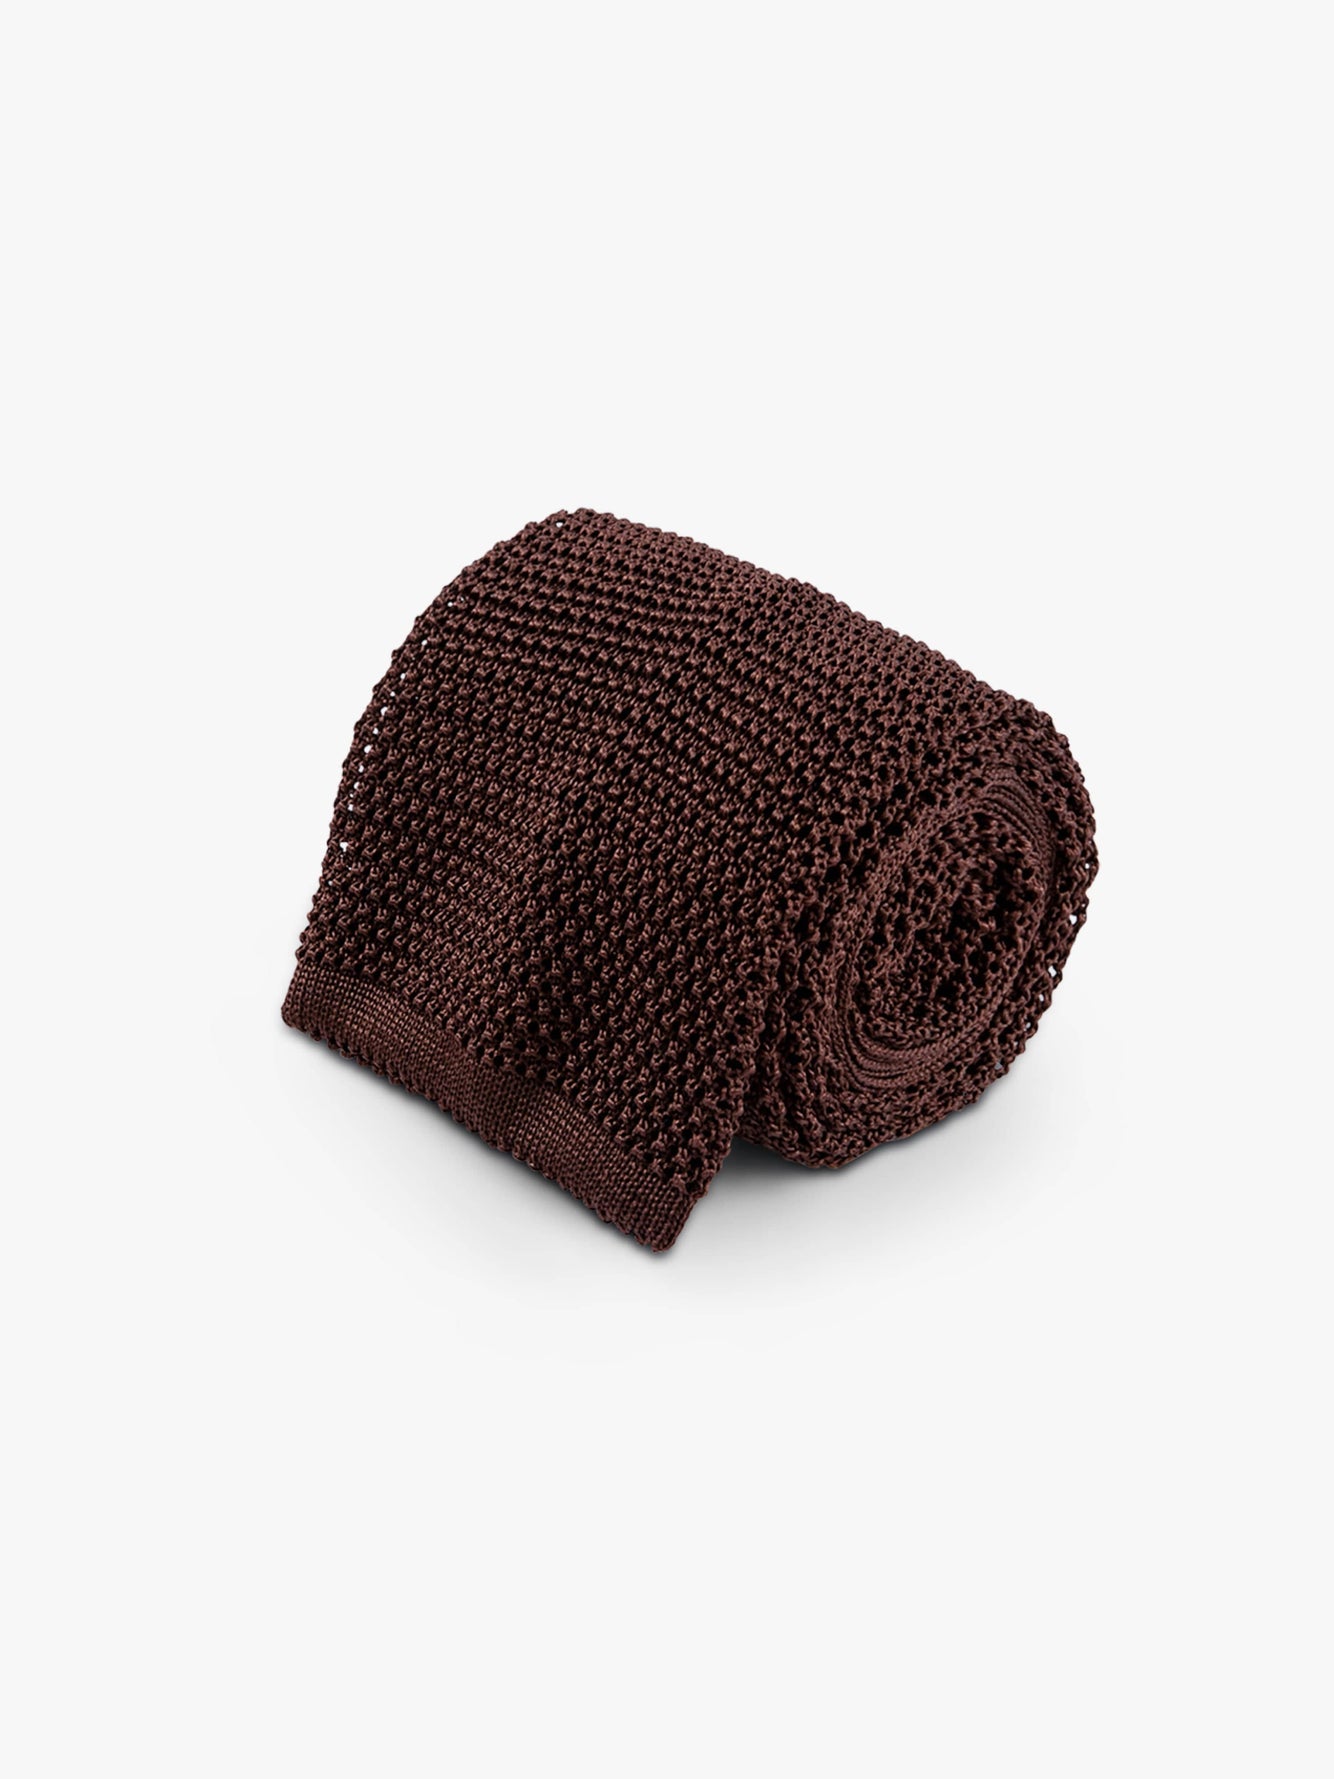 Brown Knitted Tie - Grand Le Mar